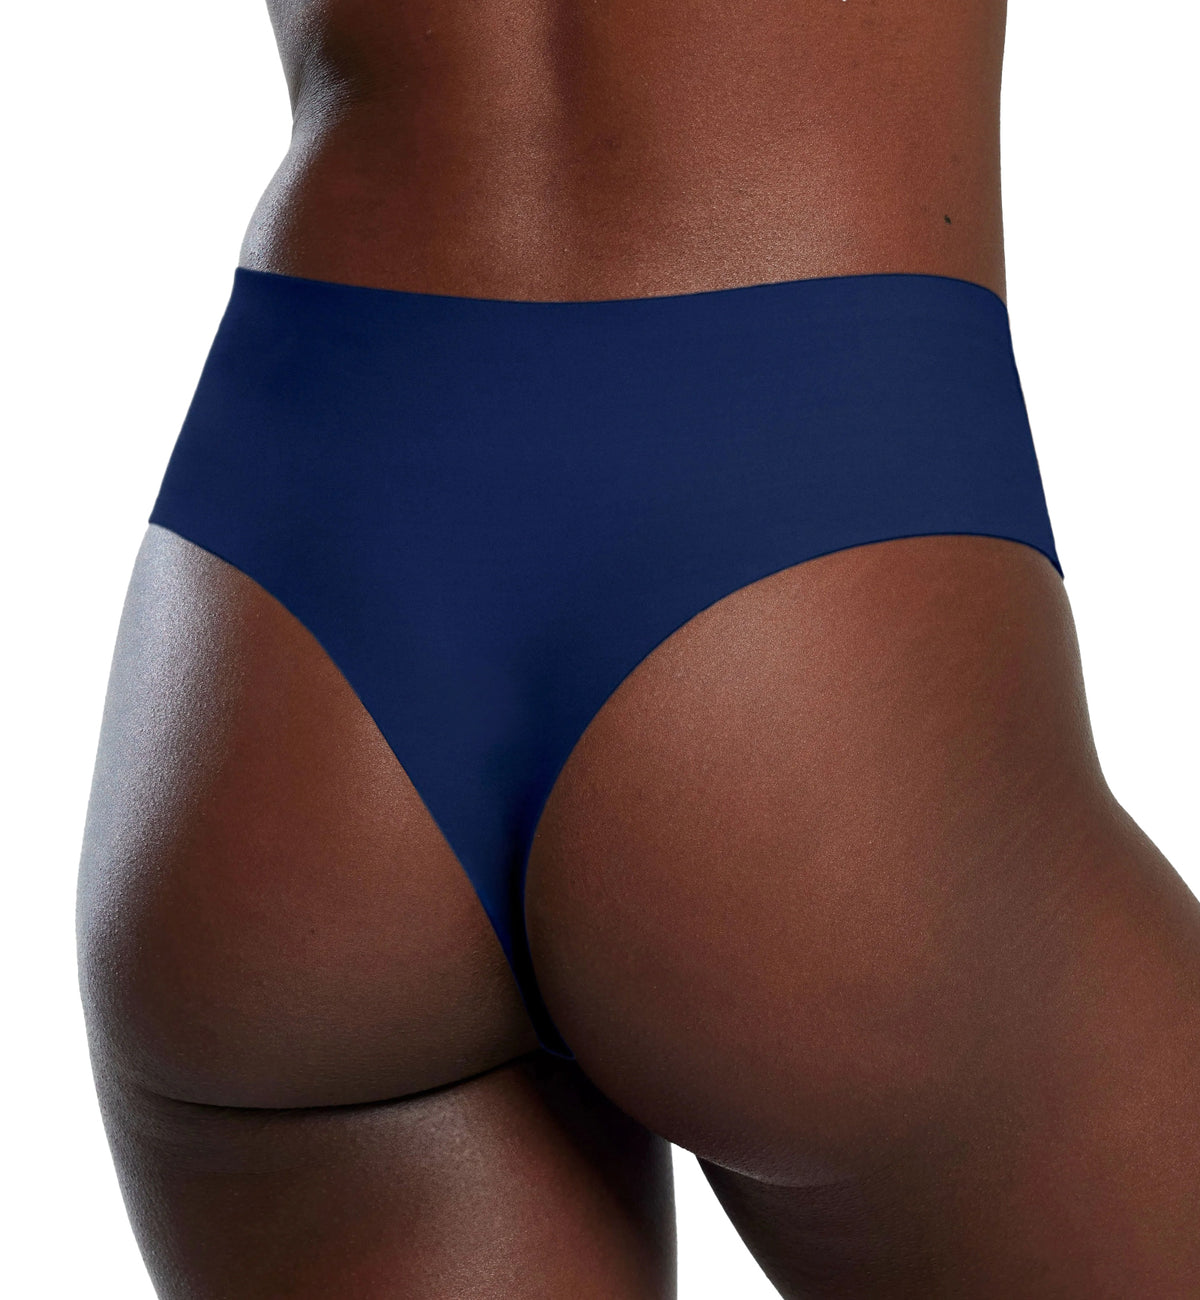 Evelyn &amp; Bobbie High-Waisted Thong (1703/1709),US 0-14,Midnight Navy - Midnight Navy,US 0 - 14